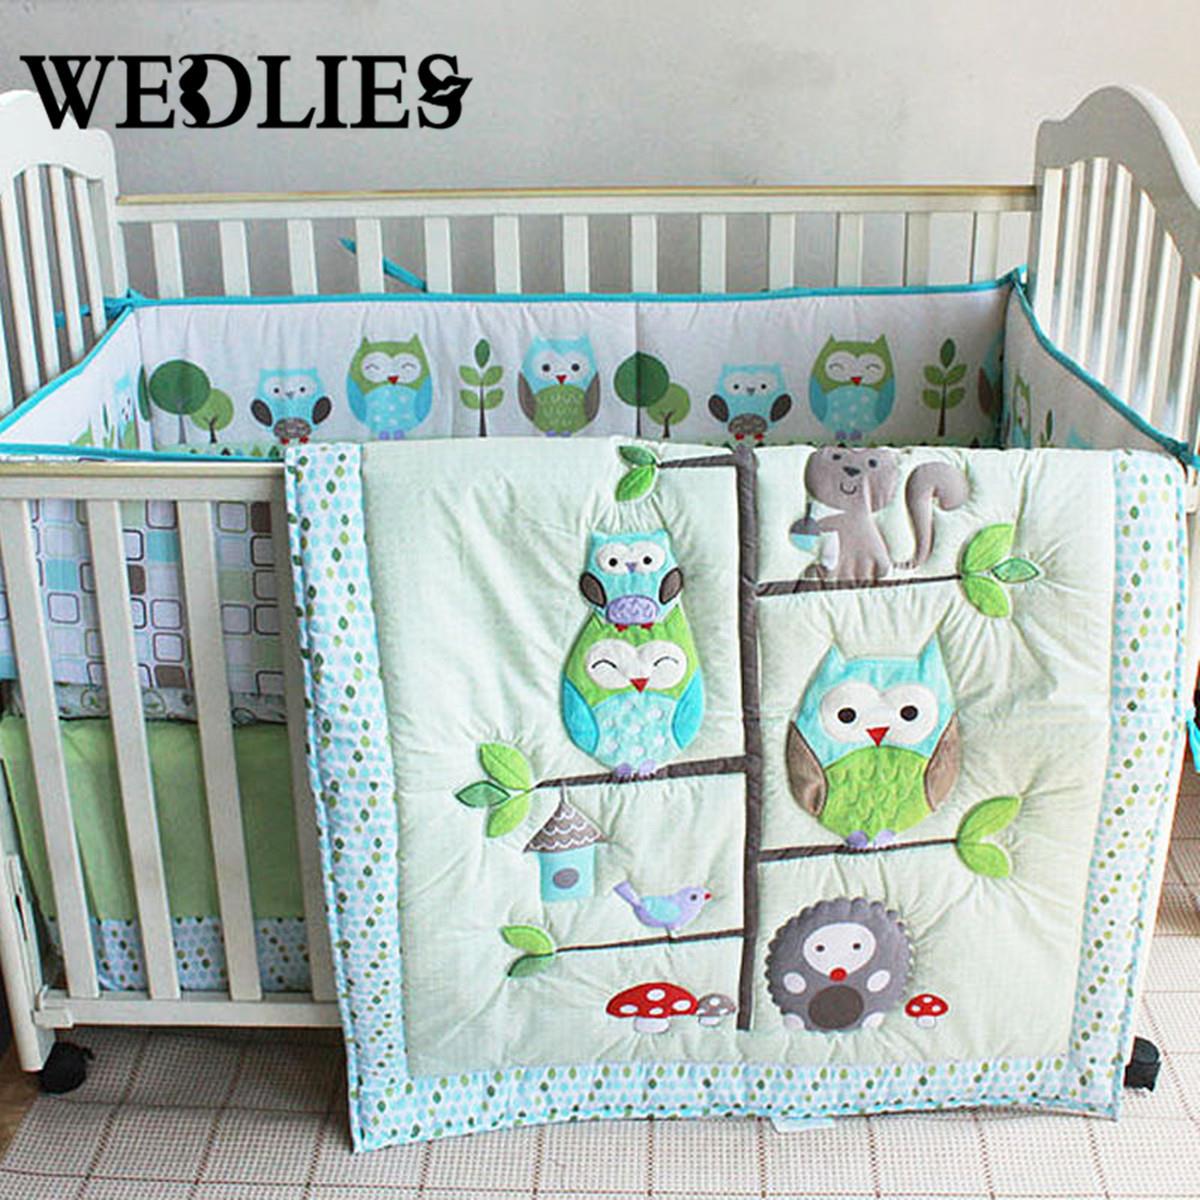 furniture give your nursery tic accent with cute owl crib bedding whale dinosaur baby deer grey girl elephant sets nautical jcpenney tables teal home accessories modern bedroom